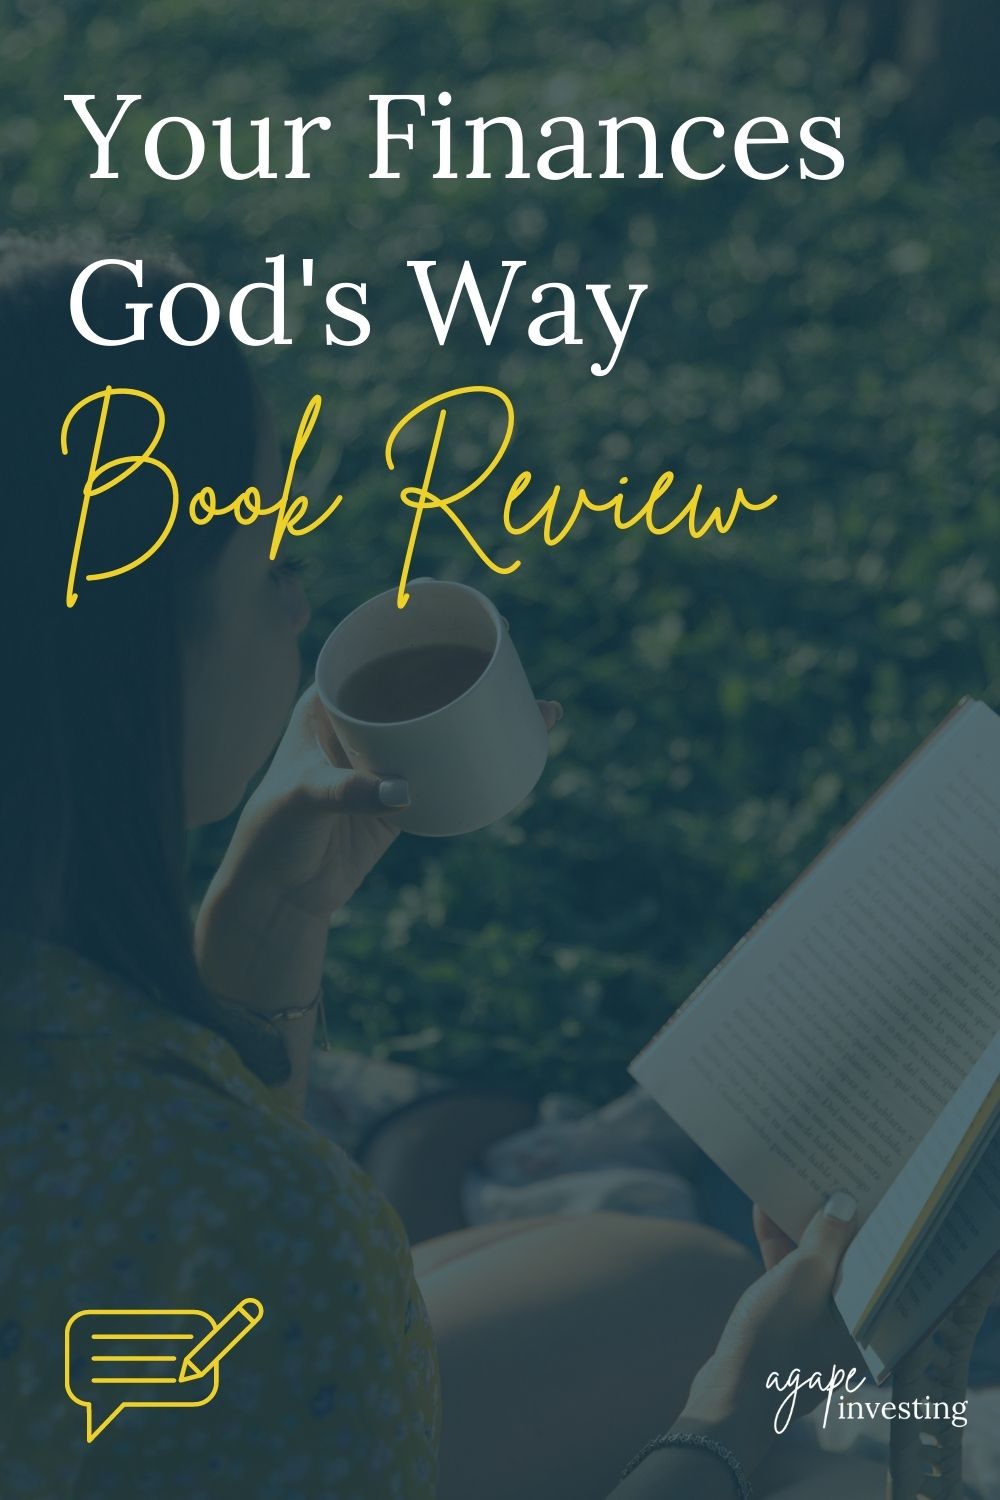 Looking for an amazing book about how to manage your money in light of the Gospel? You need to check out this new faith and finance book by Scott LaPierre, Your Finances God’s Way. 